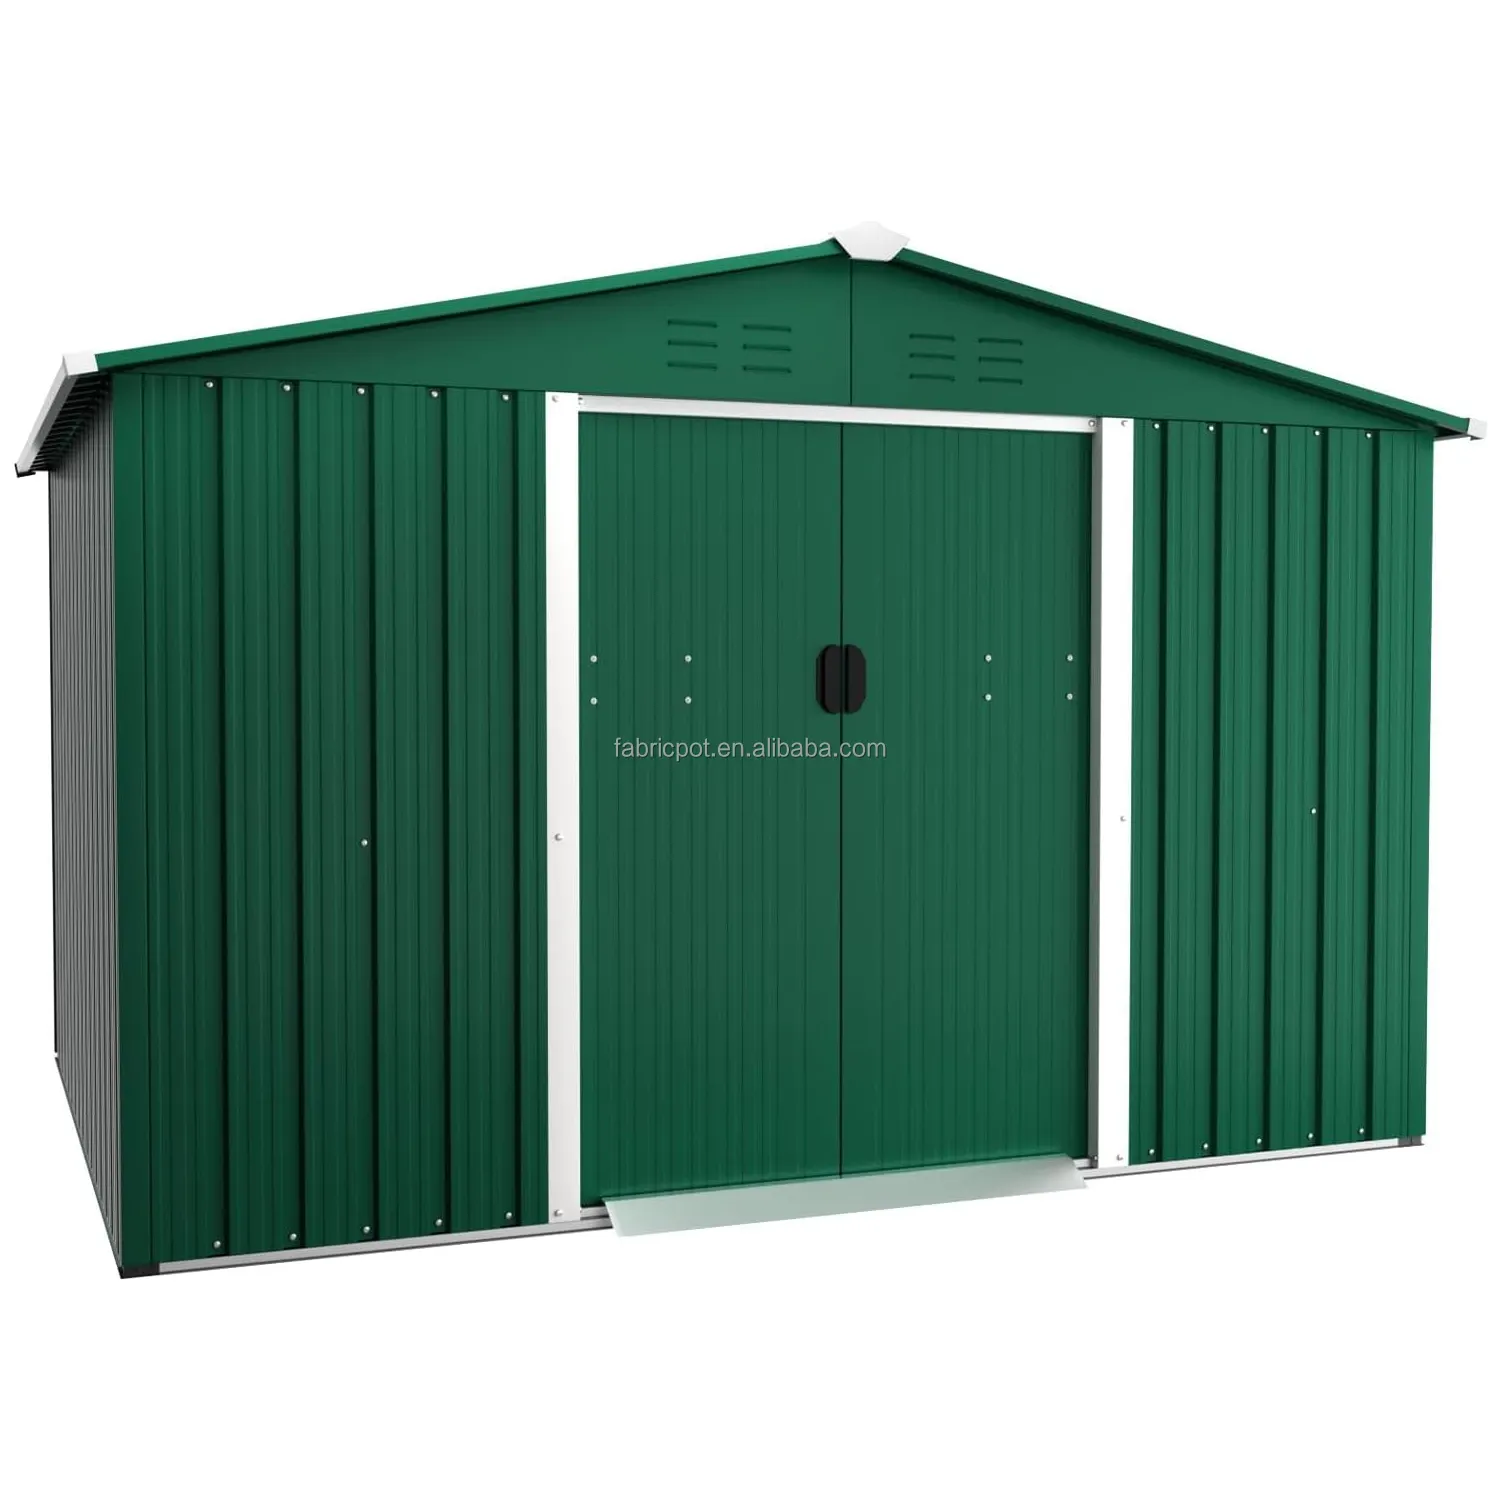 Customization Available bike lawn mower prefab shed 8 x 10 home storage sheds